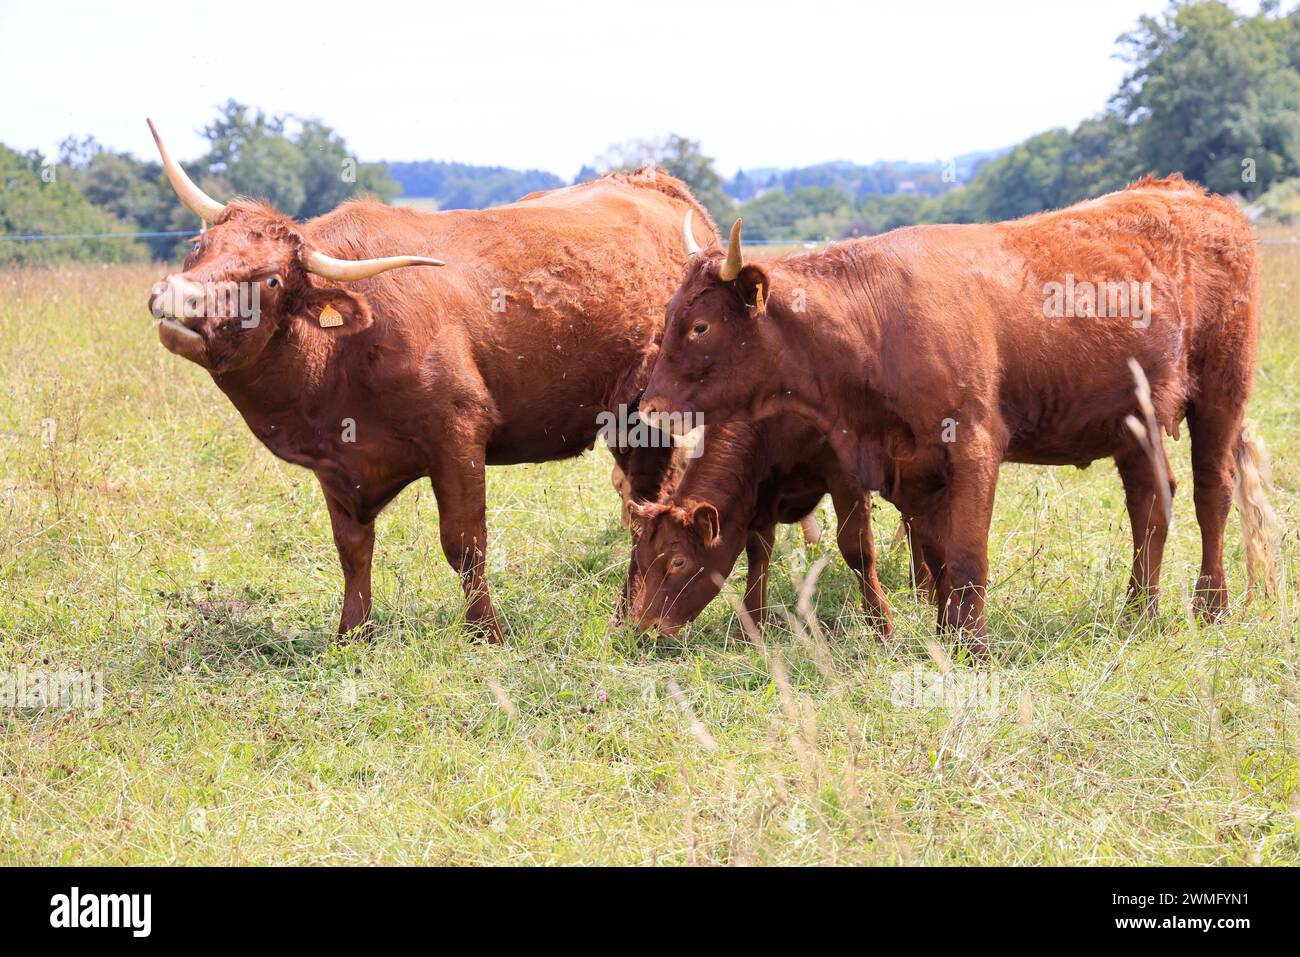 French Salers breed milk and meat cows characterized by their mahogany-colored coat during summer and heatwaves. Agriculture, cattle breeding and huma Stock Photo